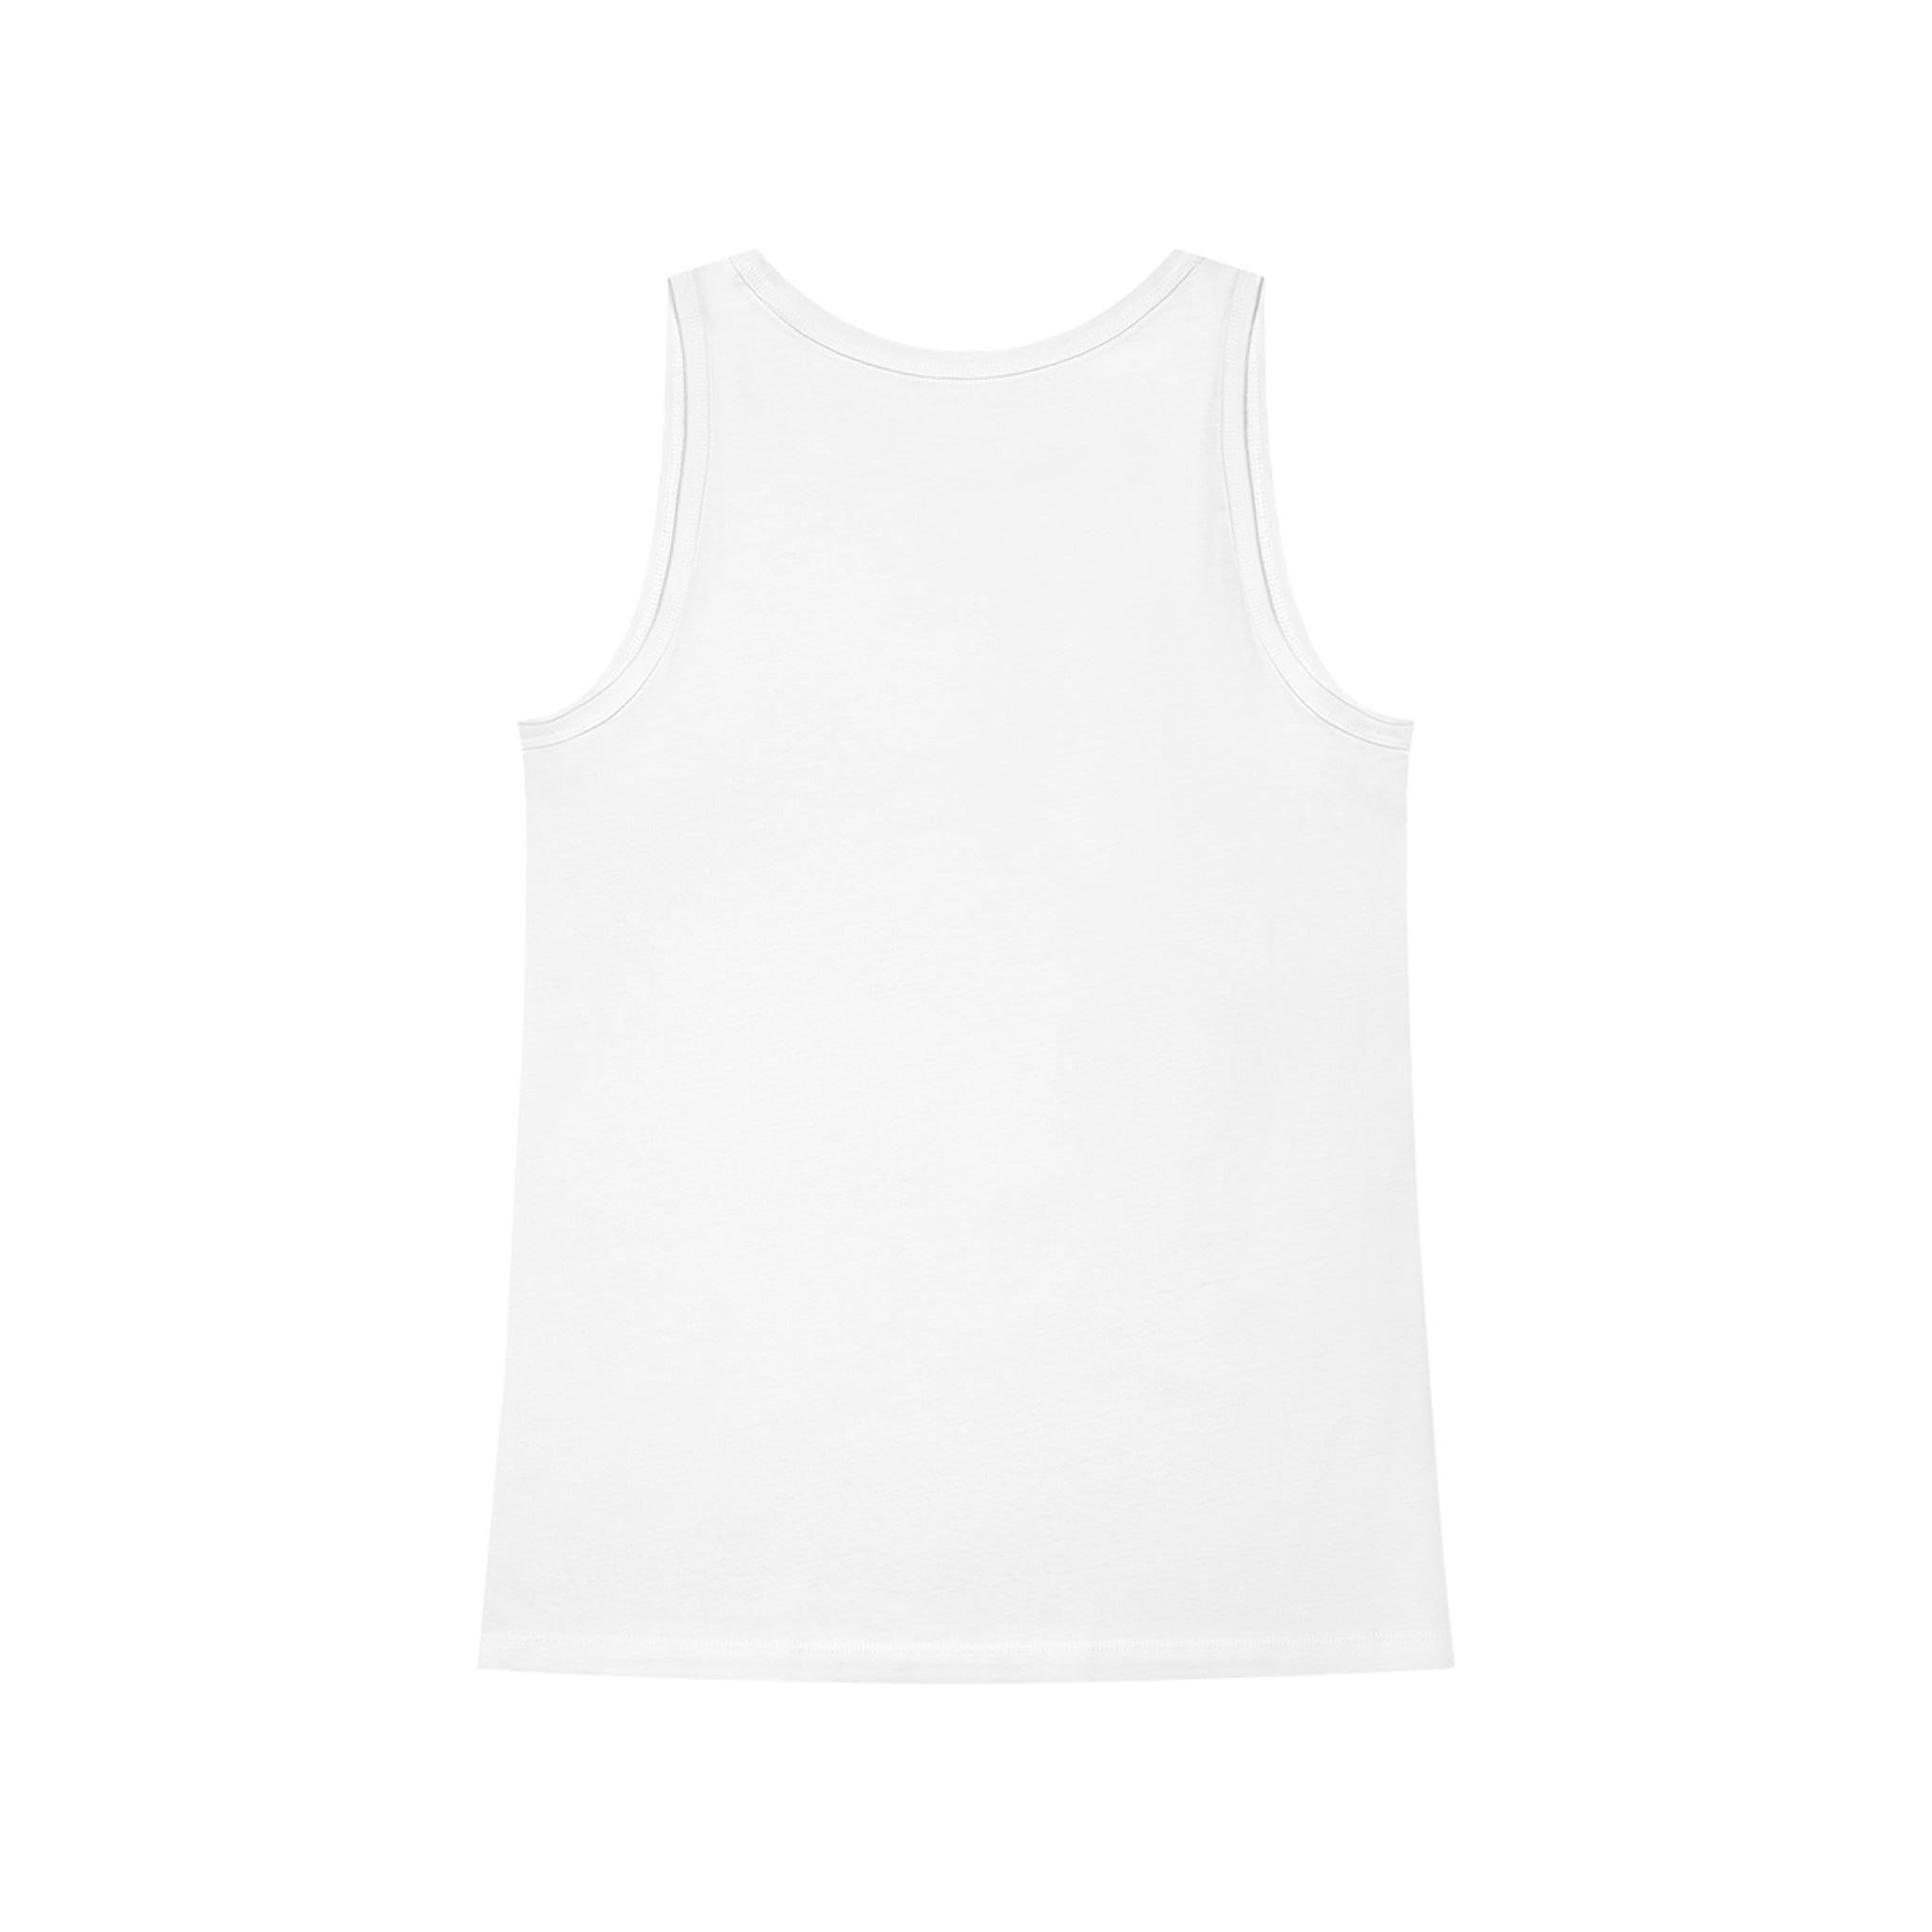 An Ox Women's Dreamer Tank Top on a white background.